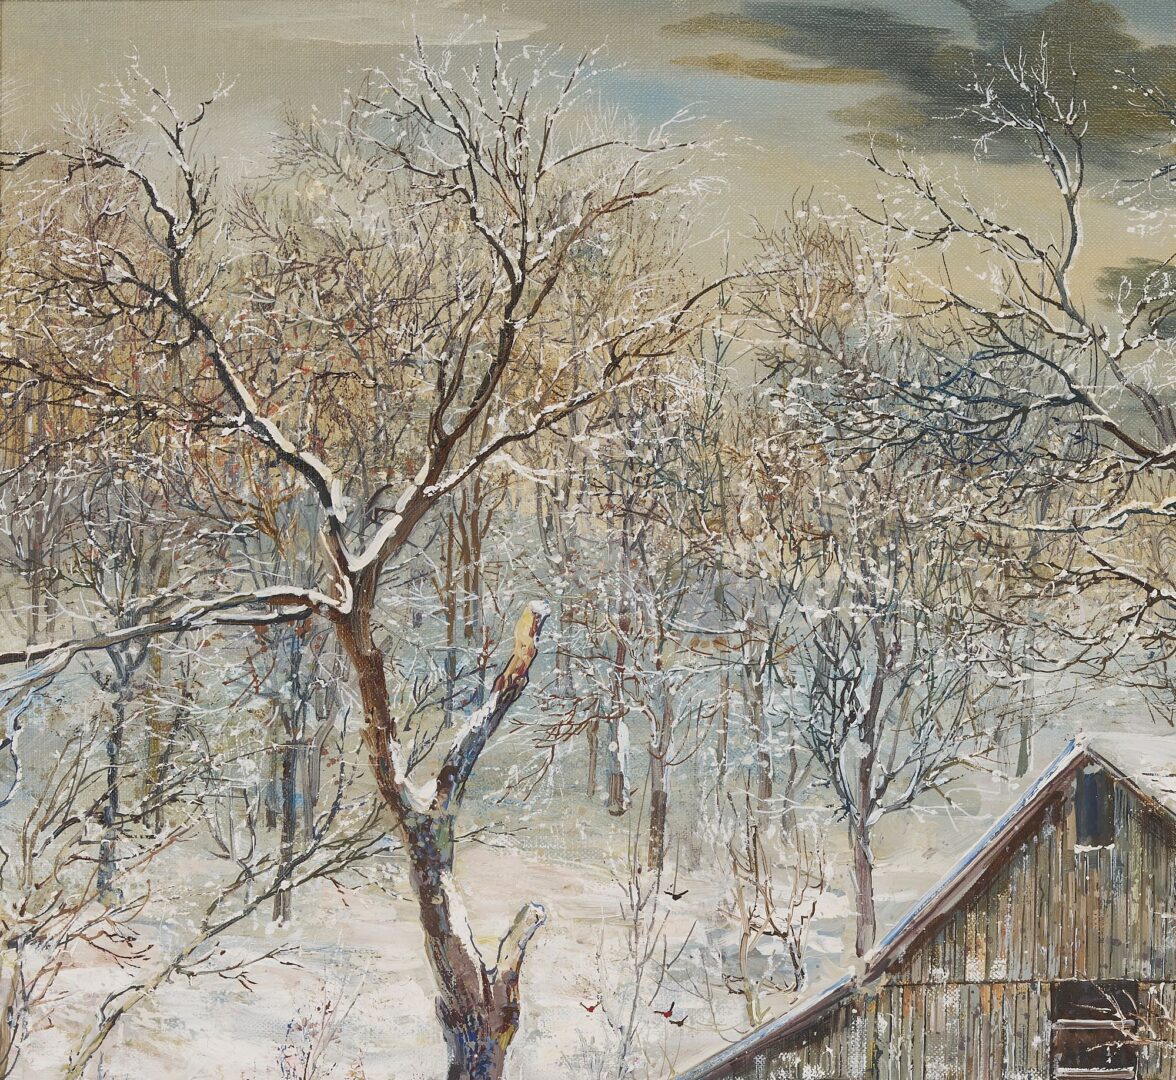 Lot 414: Marion Cook O/C TN Winter Landscape, Barn in Snow, 1980